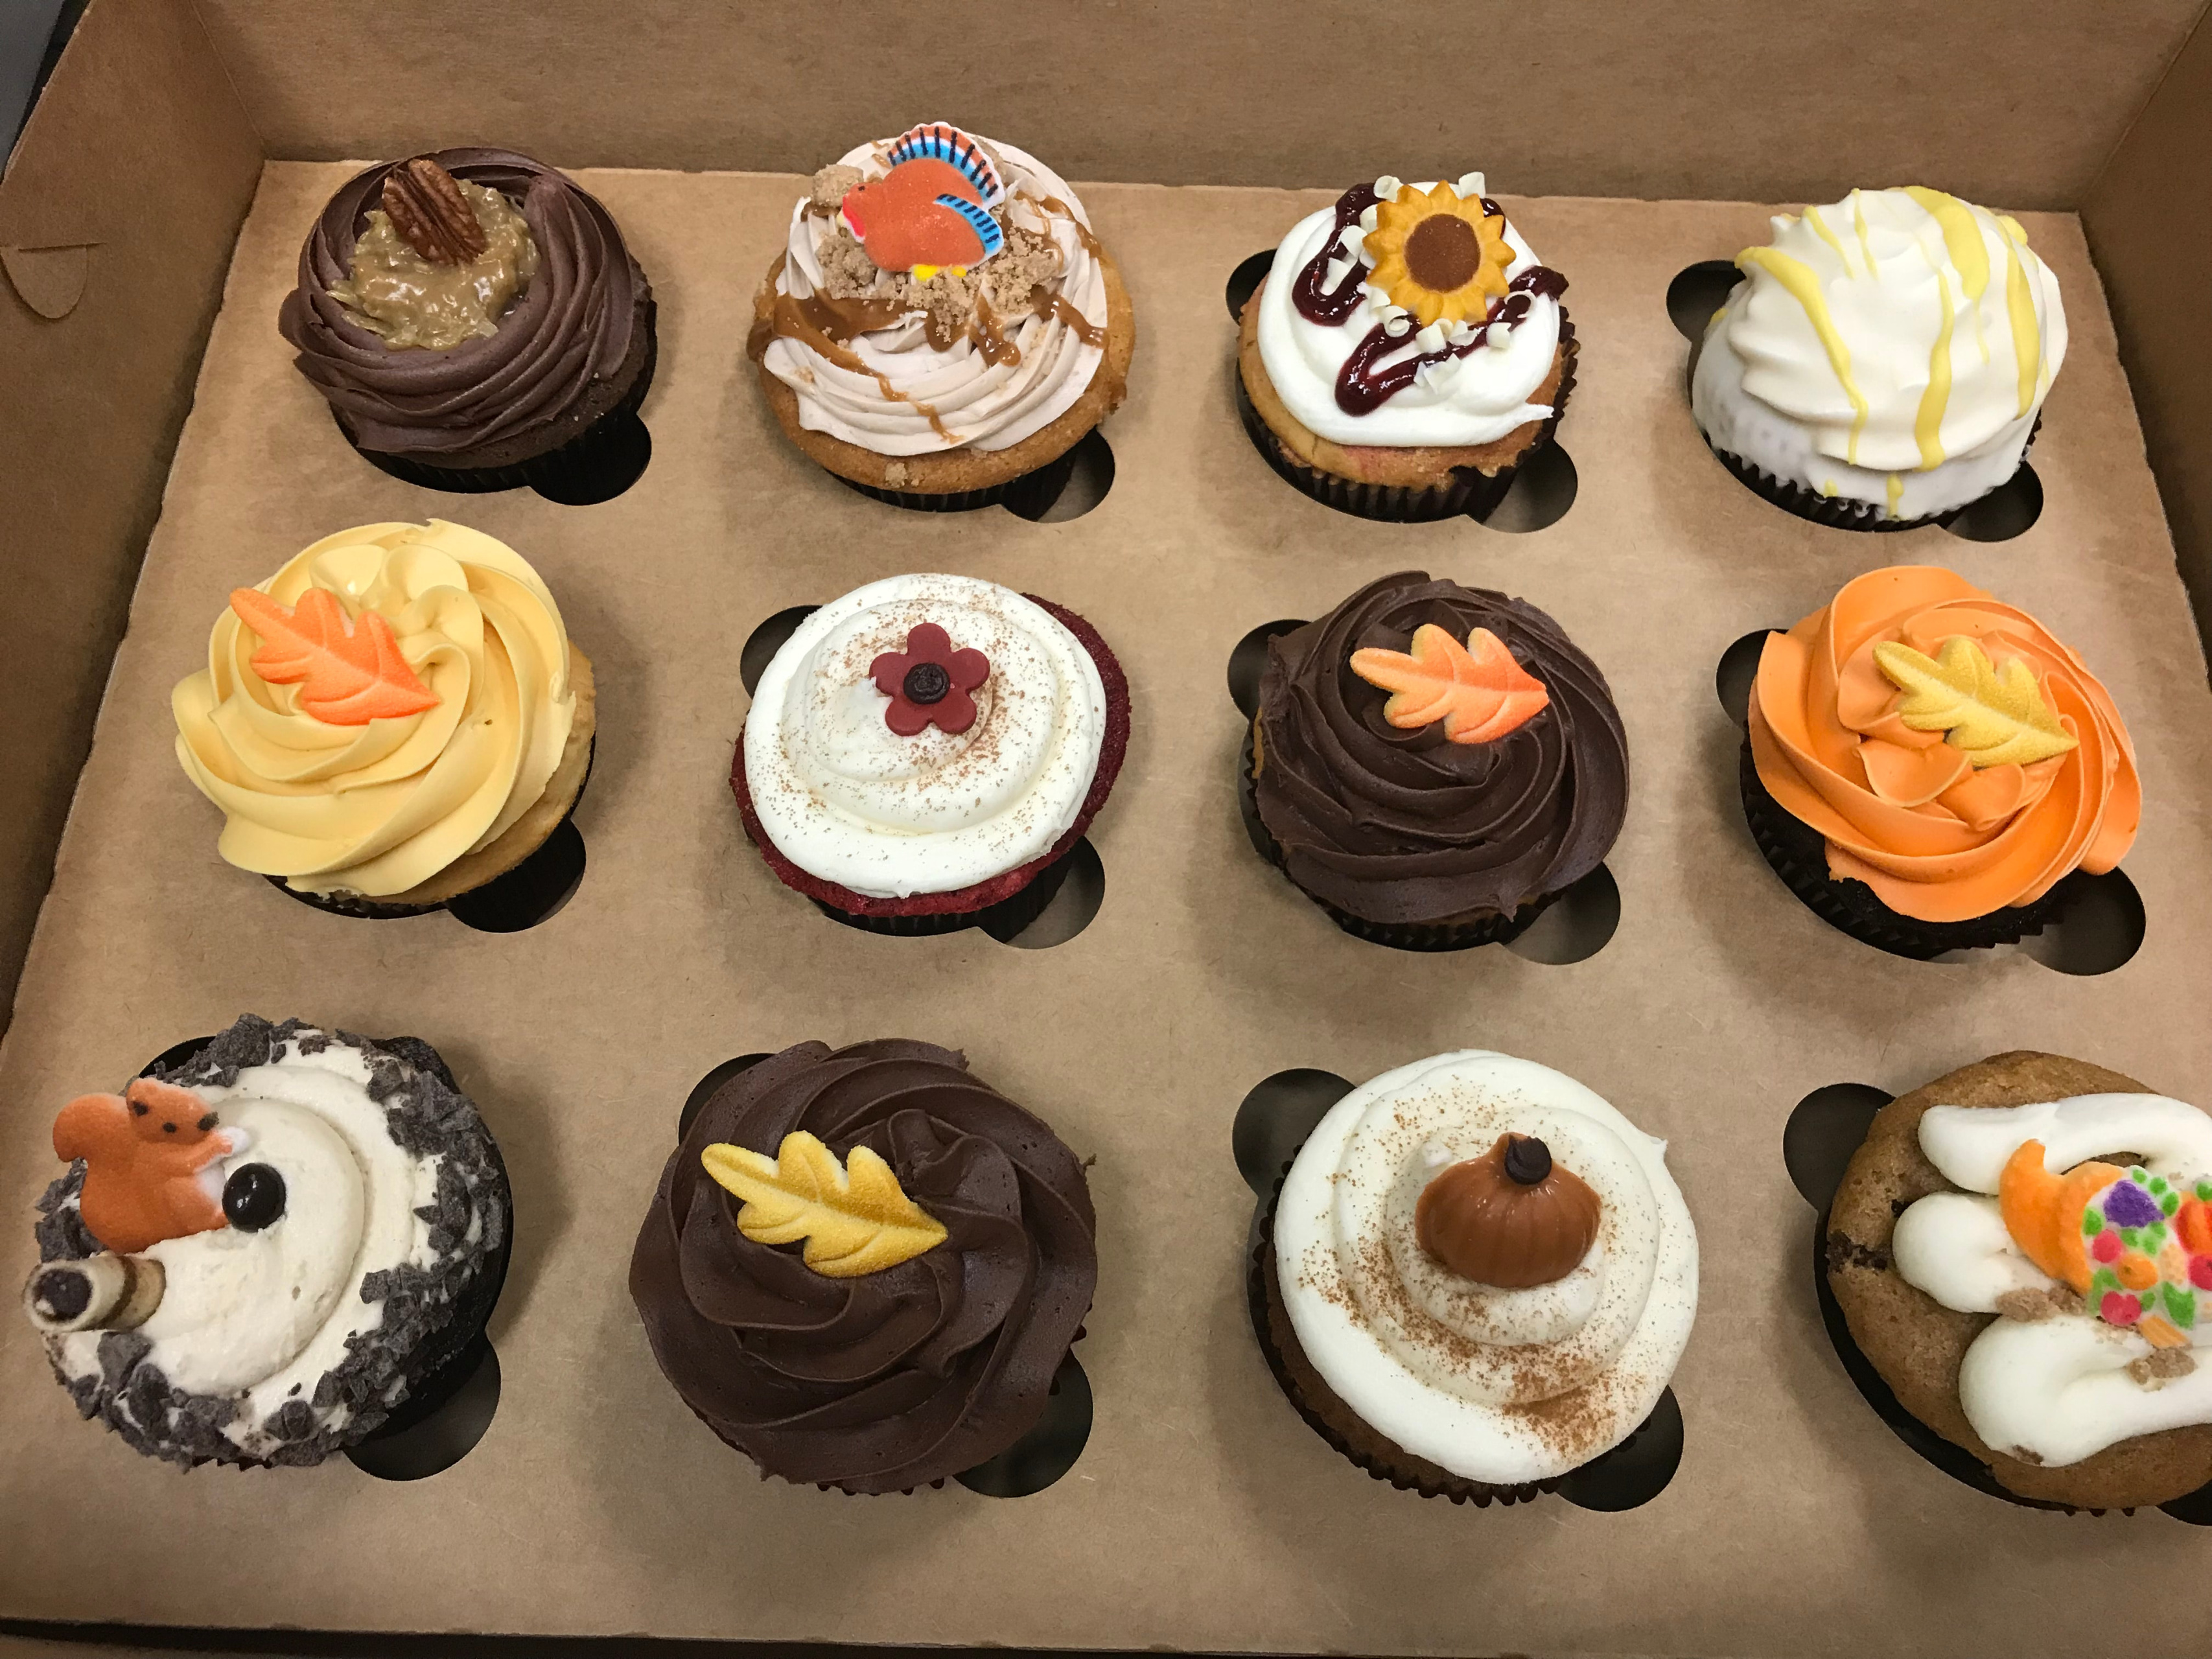 Thanksgiving cupcake special sale save up to 25% off